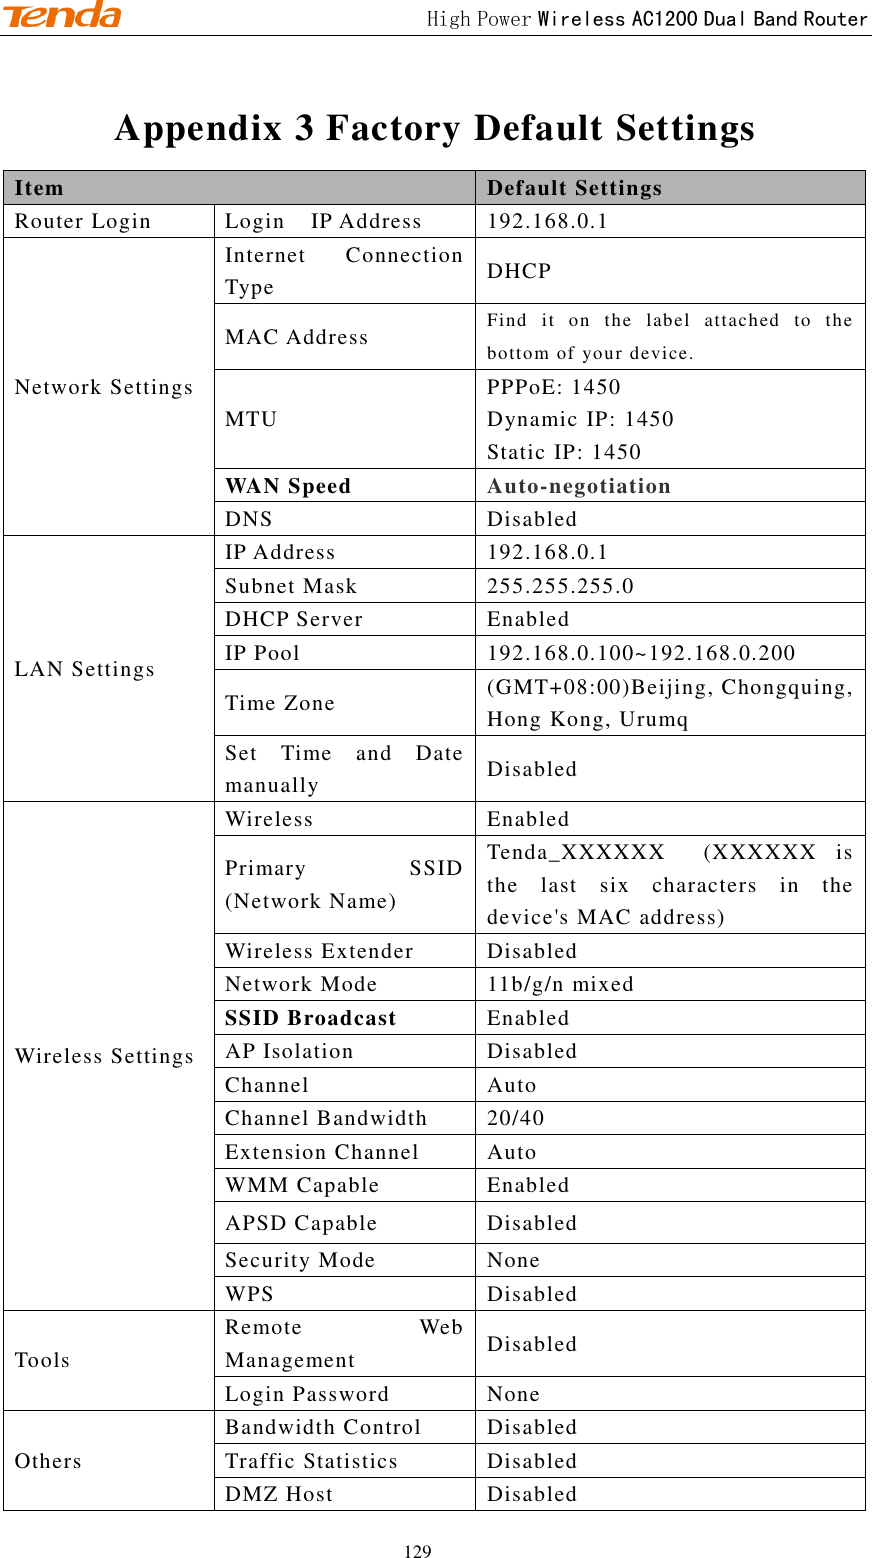                                             High Power Wireless AC1200 Dual Band Router 129 Appendix 3 Factory Default Settings Item Default Settings Router Login Login    IP Address 192.168.0.1 Network Settings Internet  Connection Type DHCP MAC Address Find  it  on  the  label  attached  to  the bottom of your device. MTU PPPoE: 1450 Dynamic IP: 1450 Static IP: 1450 WAN Speed Auto-negotiation DNS Disabled LAN Settings IP Address 192.168.0.1 Subnet Mask 255.255.255.0 DHCP Server Enabled IP Pool 192.168.0.100~192.168.0.200 Time Zone (GMT+08:00)Beijing, Chongquing, Hong Kong, Urumq Set  Time  and  Date manually Disabled Wireless Settings Wireless Enabled Primary  SSID (Network Name) Tenda_XXXXXX    (XXXXXX  is the  last  six  characters  in  the device&apos;s MAC address) Wireless Extender Disabled Network Mode 11b/g/n mixed SSID Broadcast Enabled AP Isolation Disabled Channel Auto Channel Bandwidth 20/40 Extension Channel Auto WMM Capable Enabled APSD Capable Disabled Security Mode None WPS Disabled Tools Remote  Web Management Disabled Login Password None Others Bandwidth Control Disabled Traffic Statistics Disabled DMZ Host Disabled 